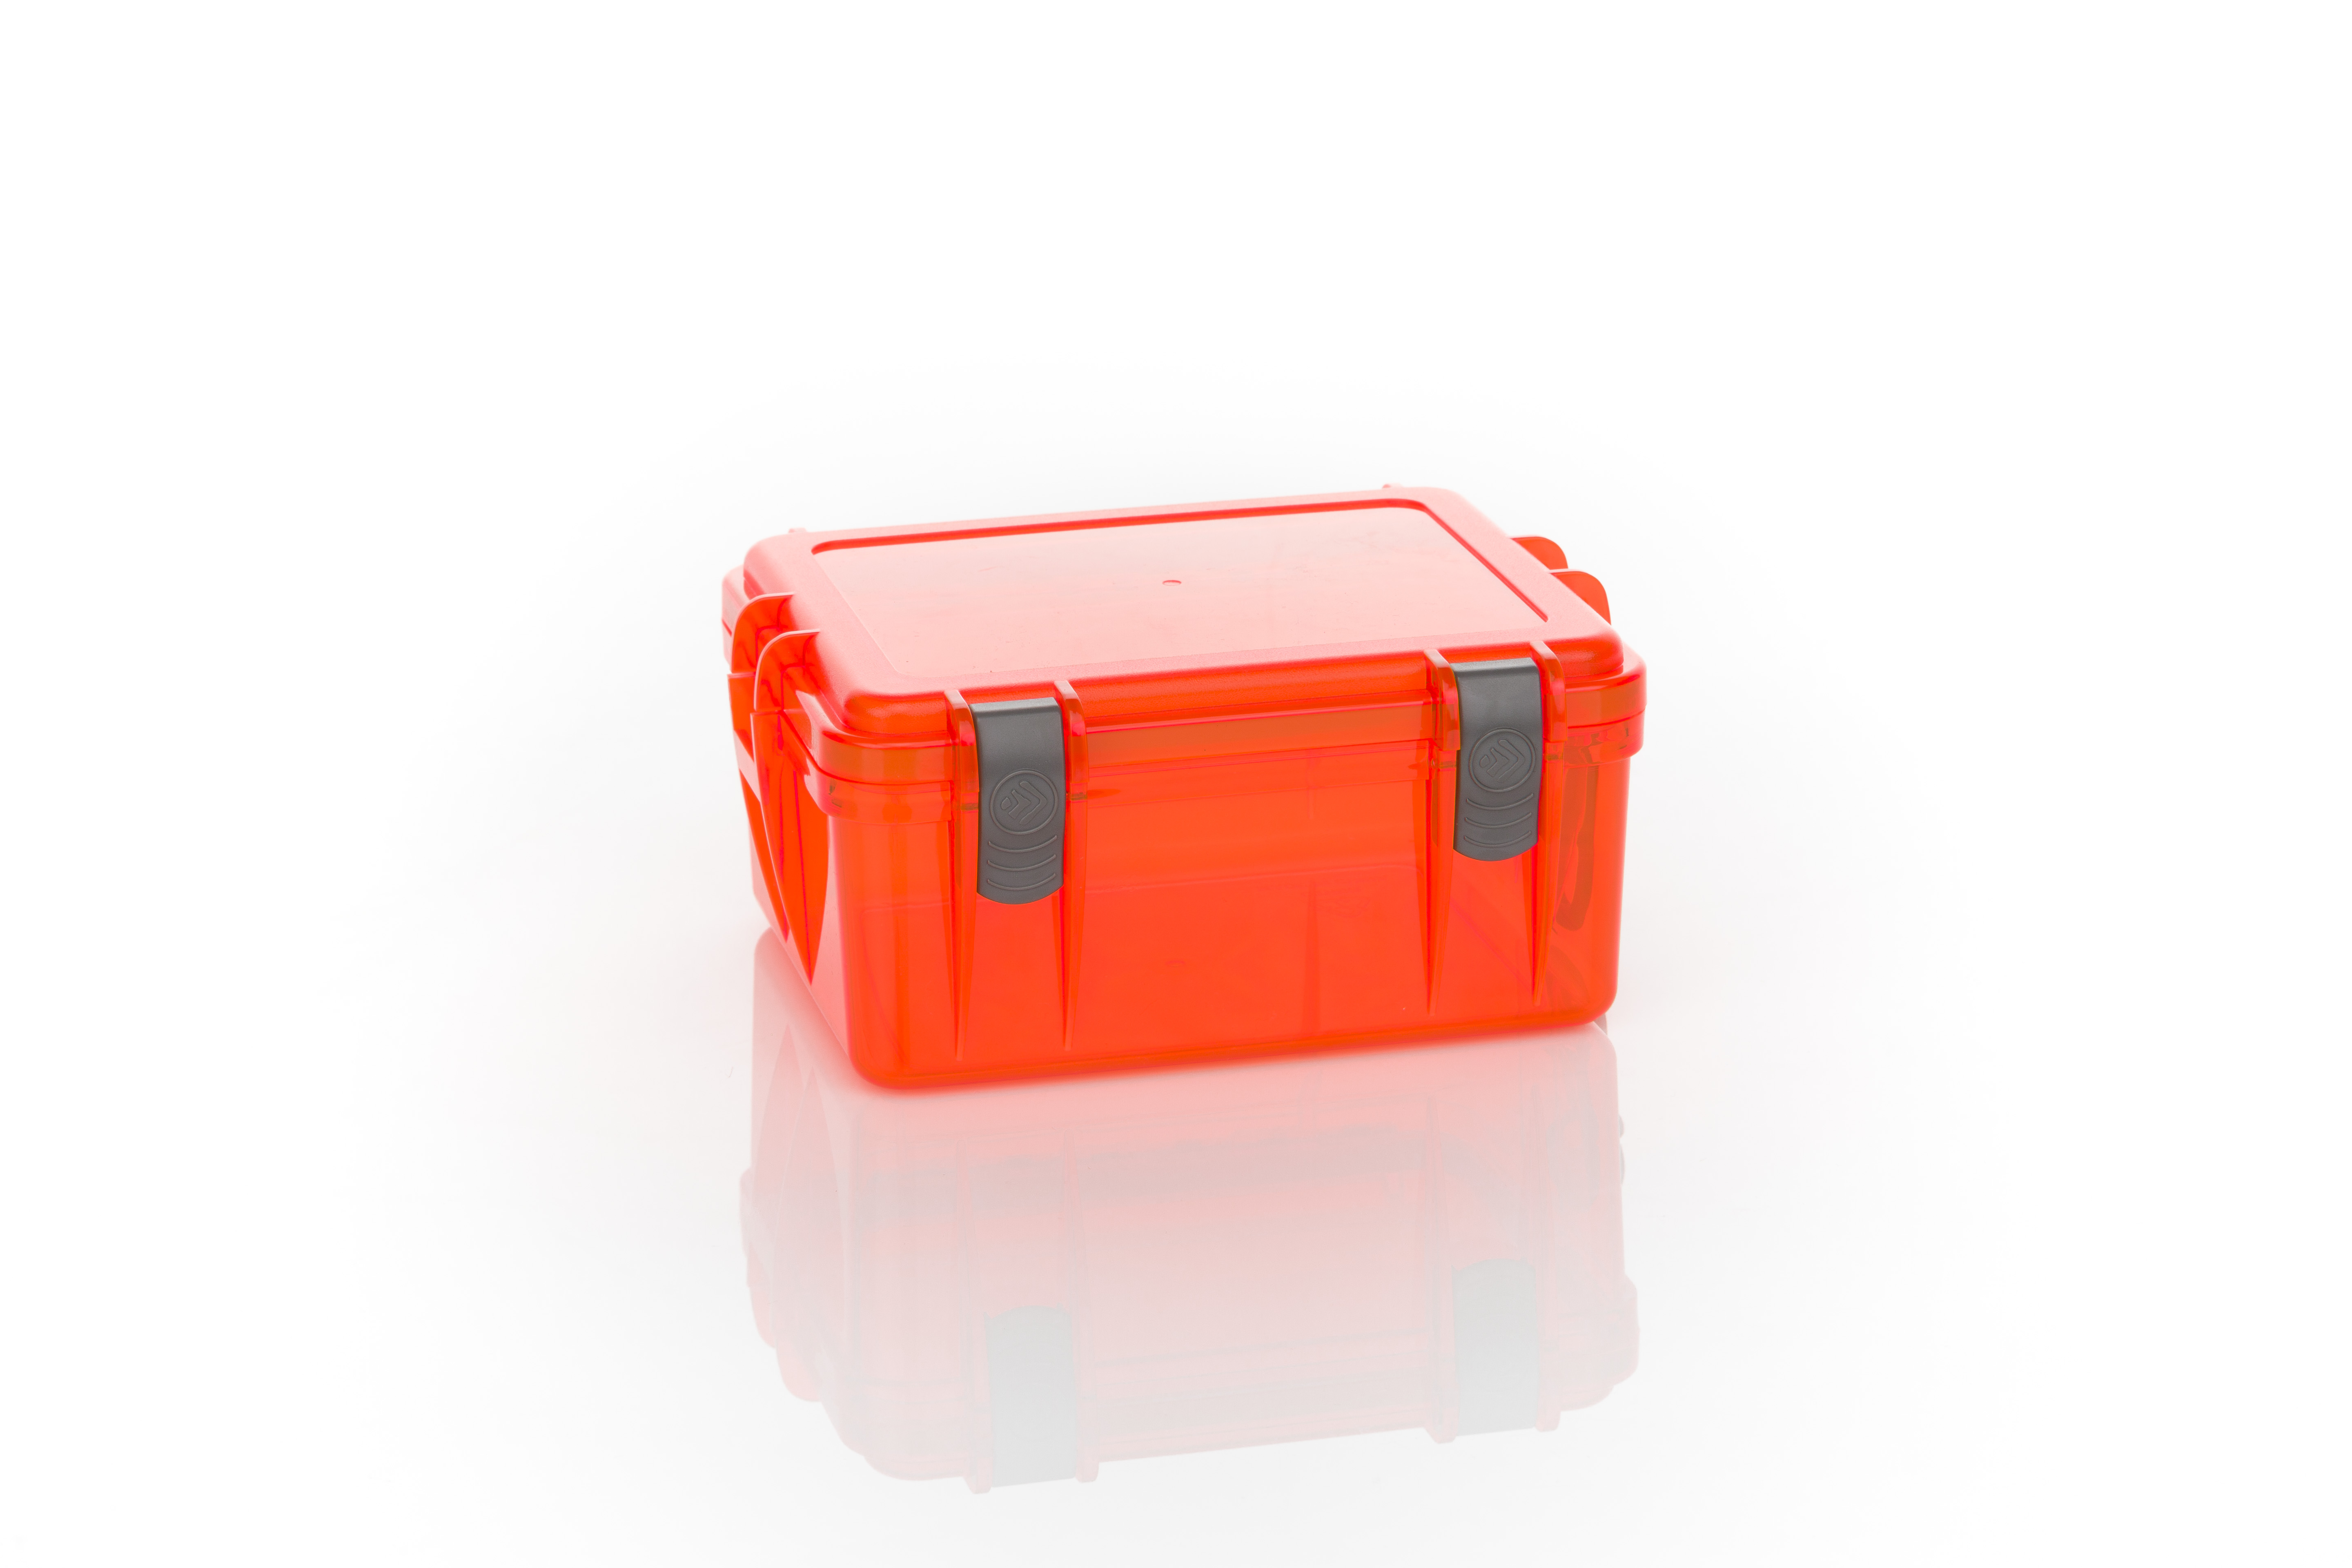 BuyWeek Shockproof Gear Box,Tool Storage Case,Outdoor Waterproof Tool  Storage Case Shockproof Gear Carrying Box Container Orange 